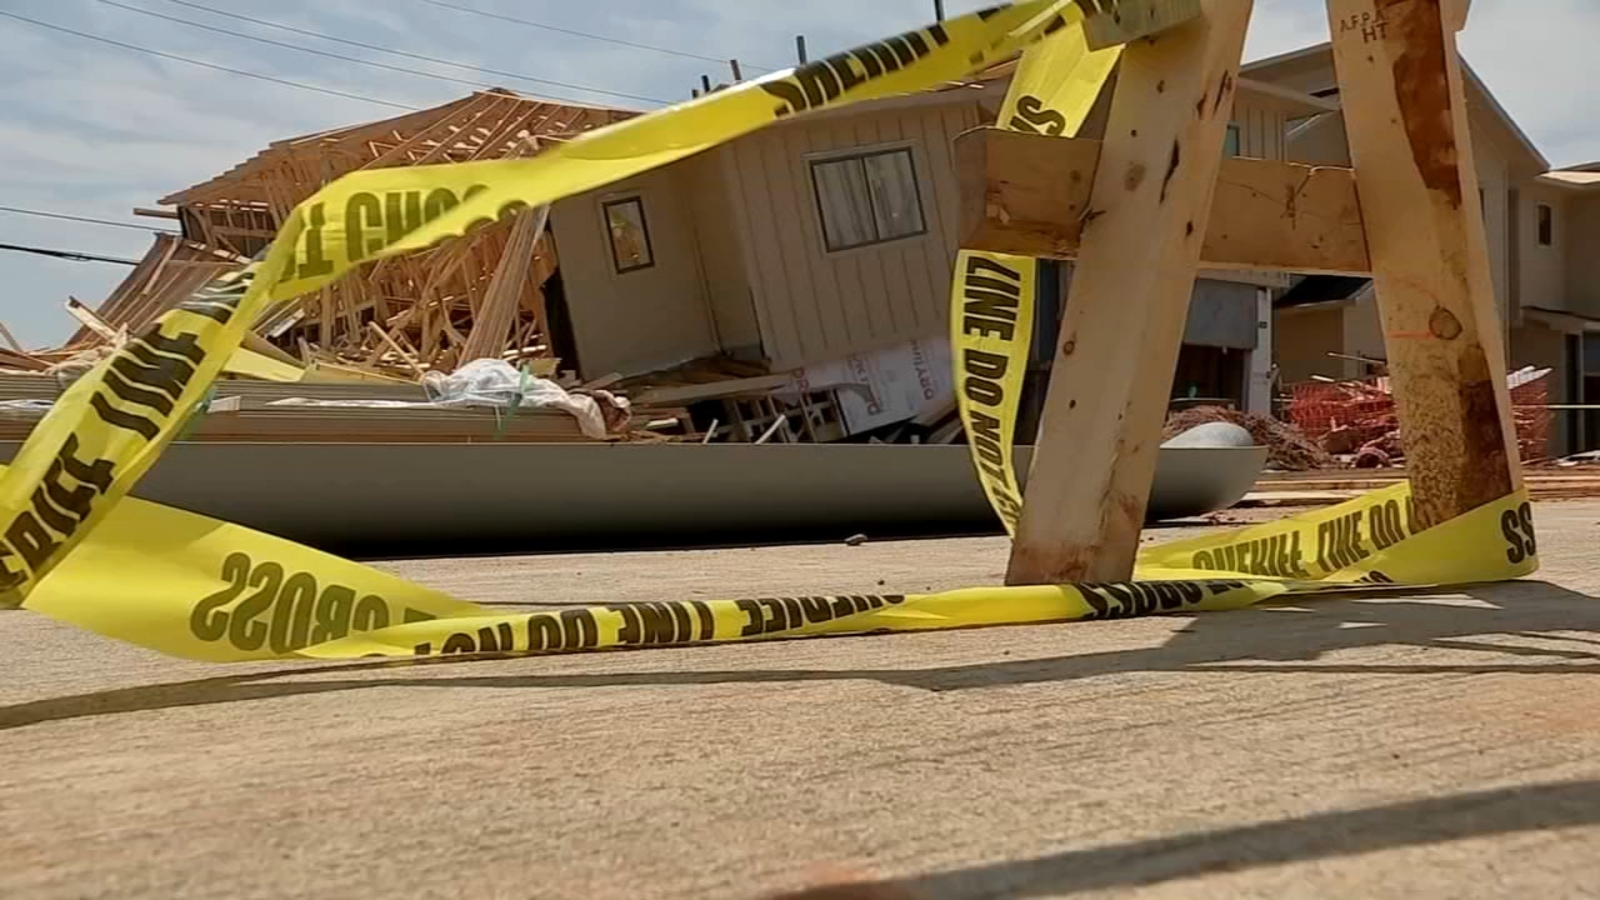 John Aaron Garcia killed: US Department of Labor investigates death of teen construction worker in Magnolia home collapse [Video]